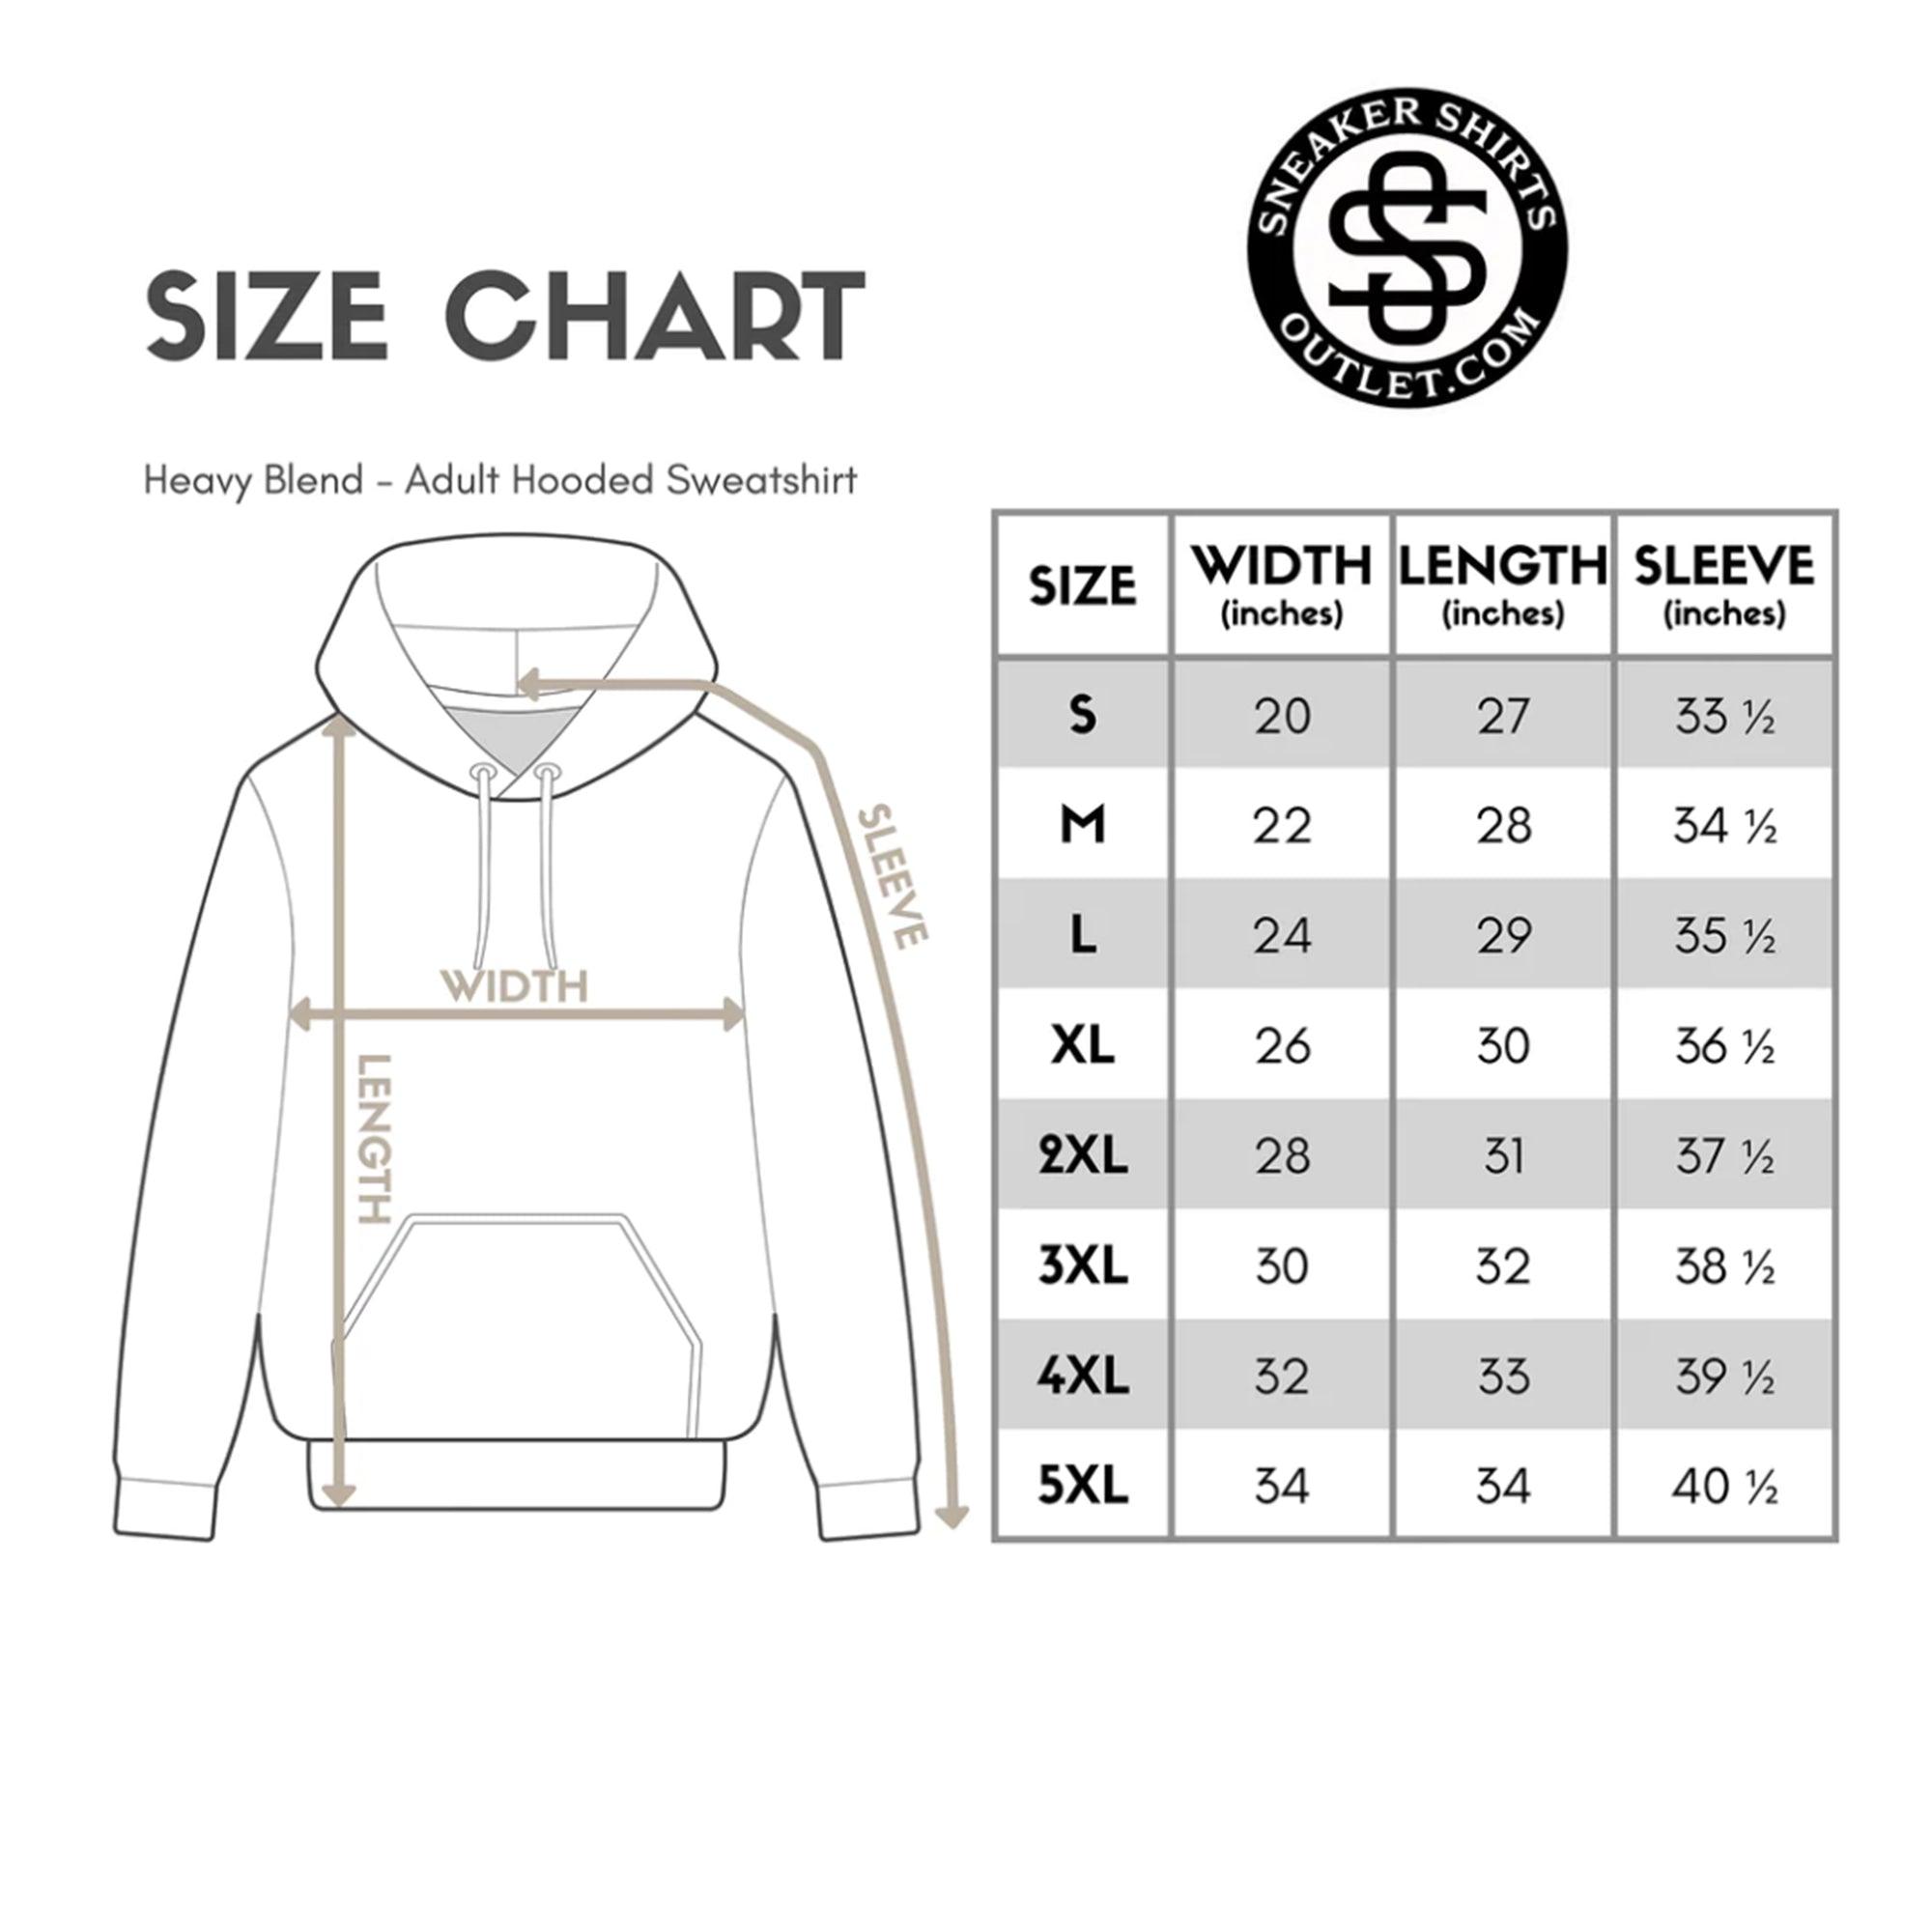 size chart Success Nutrition Hoodie Air Foamposite One Obsidian Metallic Gold photo